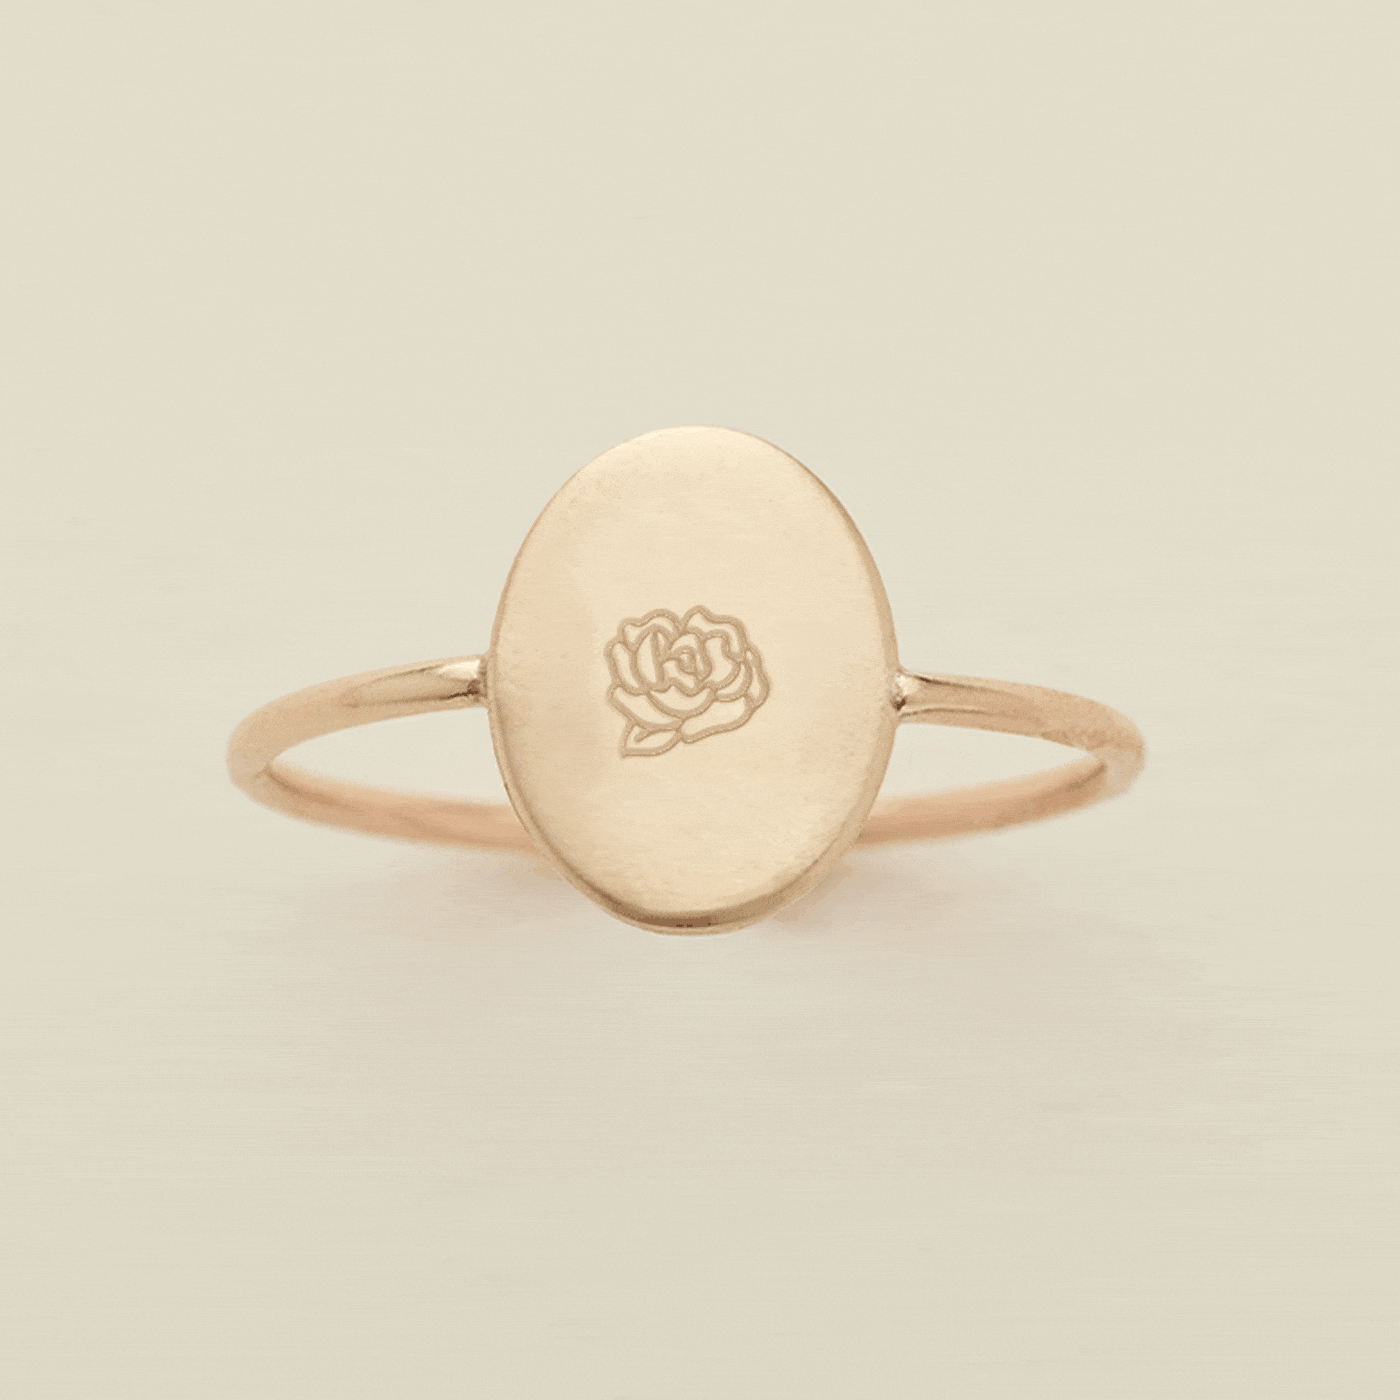 Image of Oval Customized Ring - Initial or Birth Flower